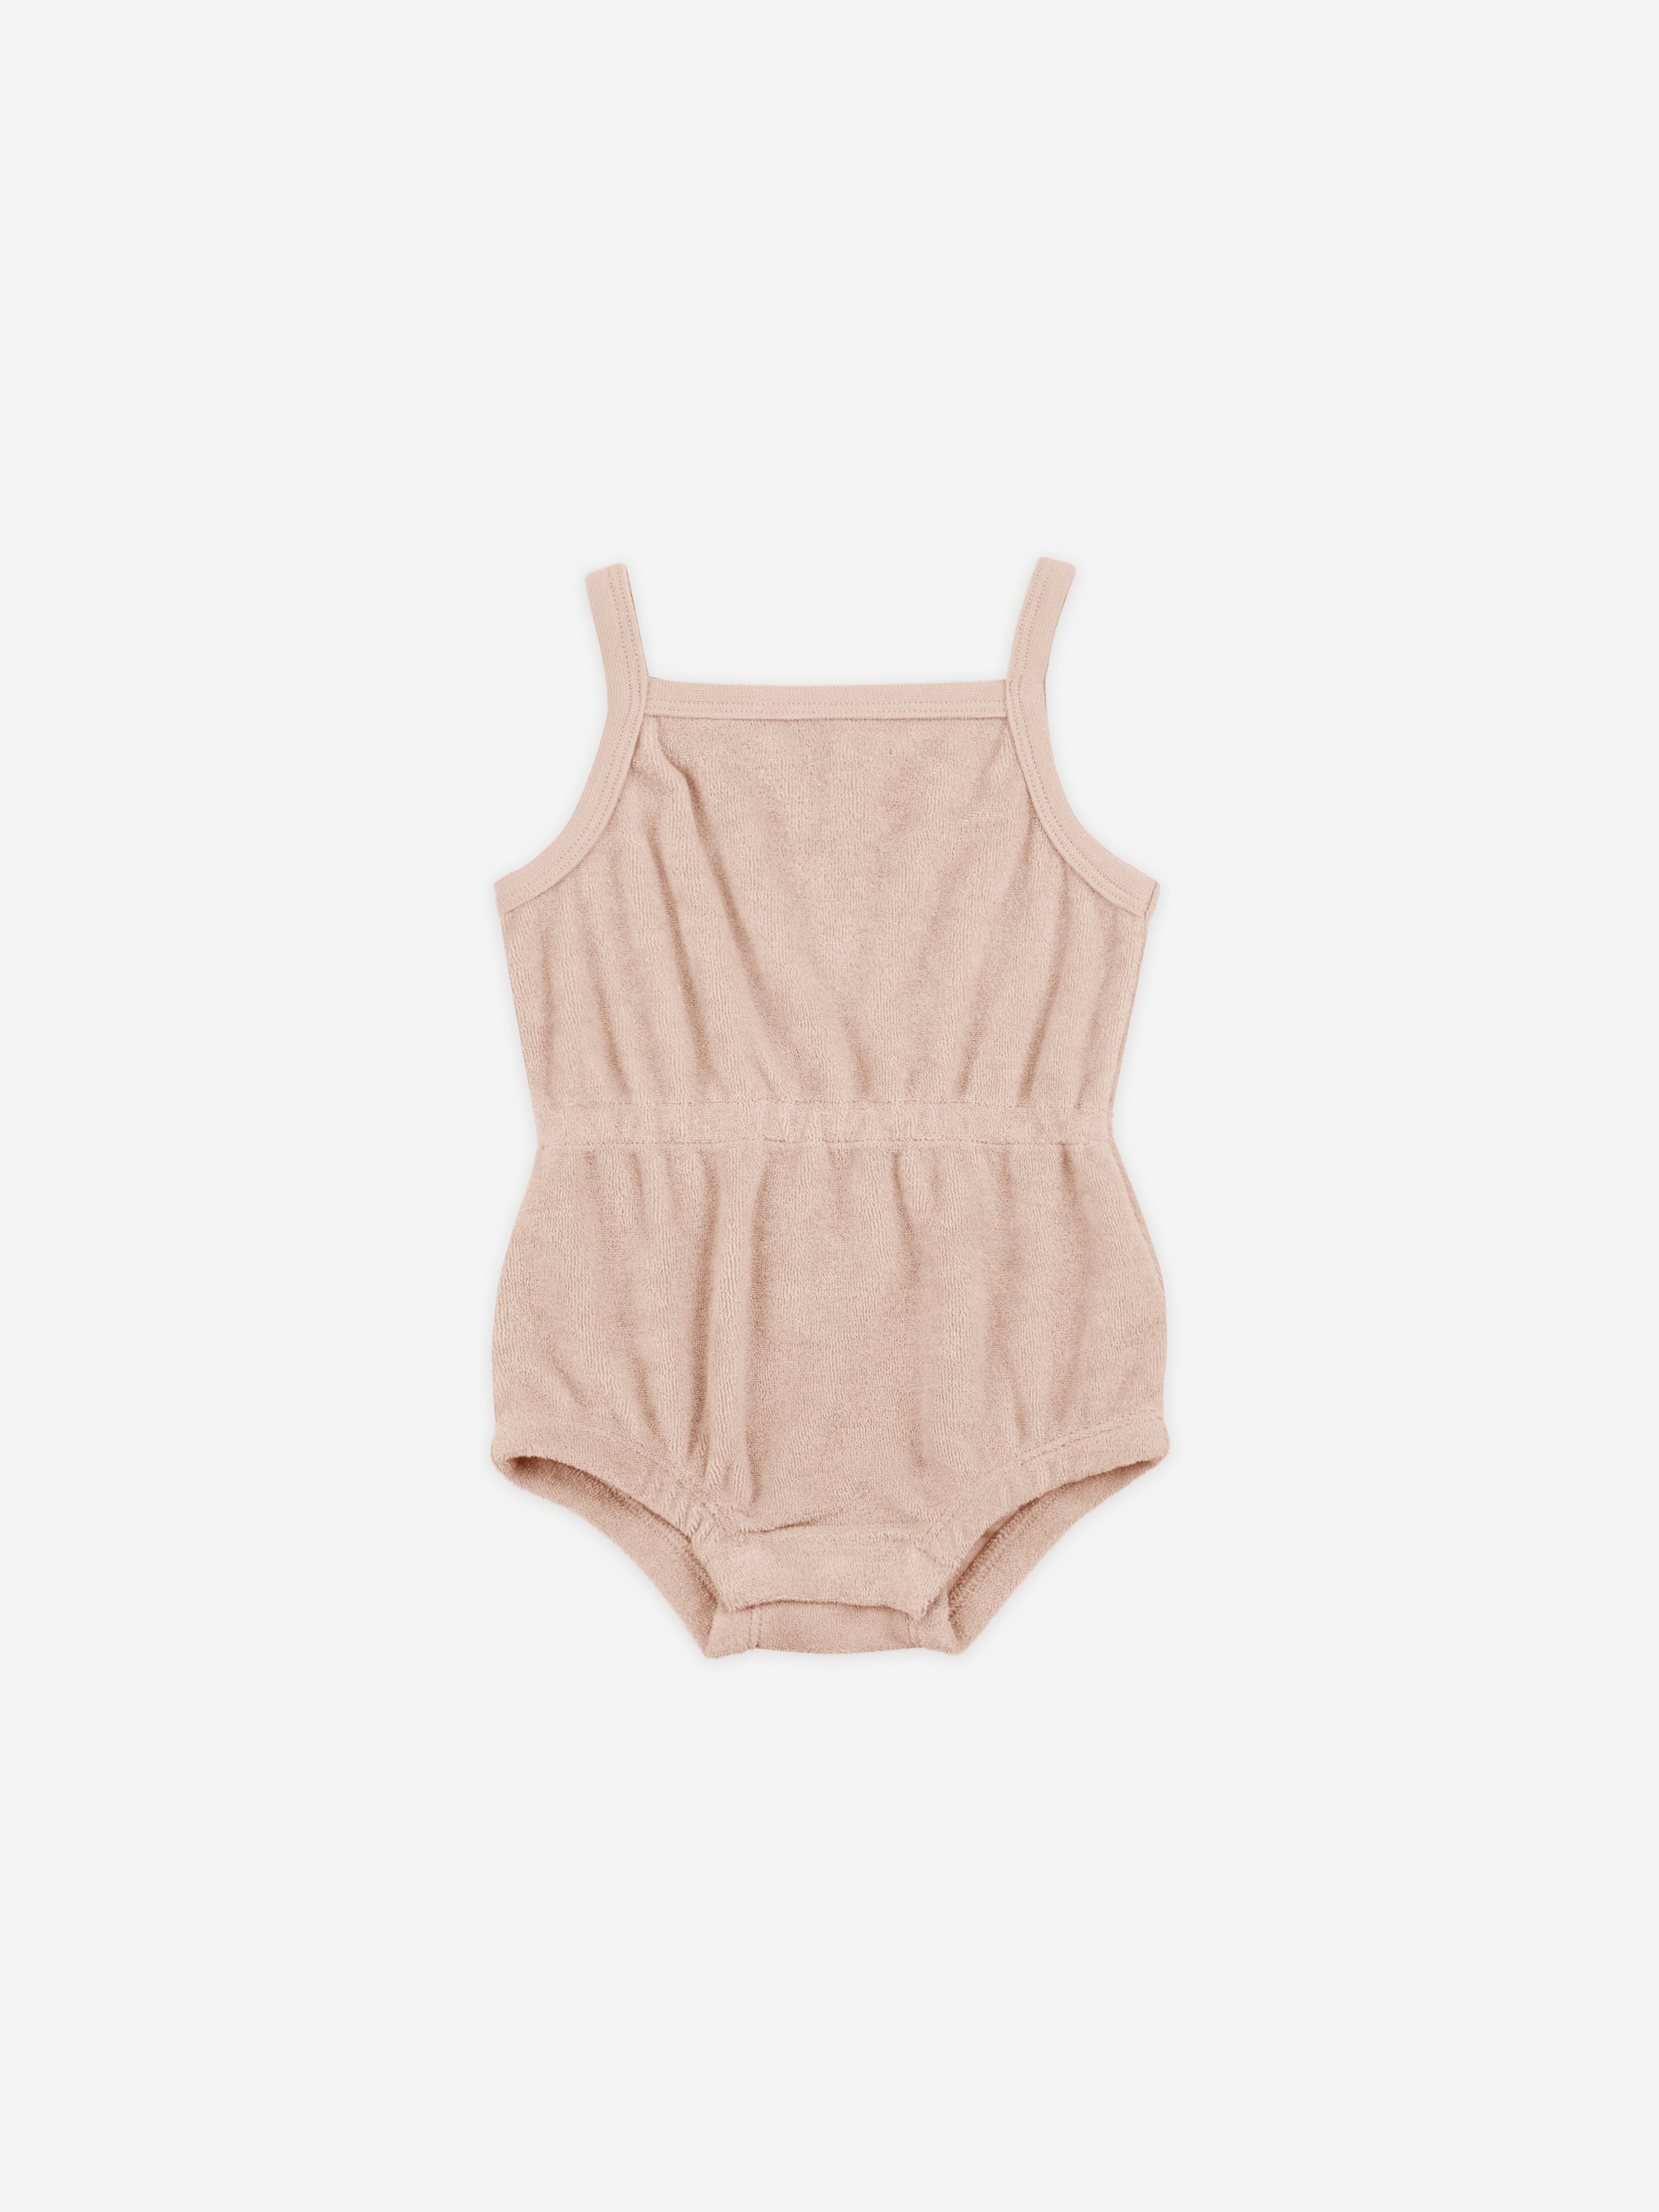 Terry Cinch Romper || Blush - Rylee + Cru | Kids Clothes | Trendy Baby Clothes | Modern Infant Outfits |